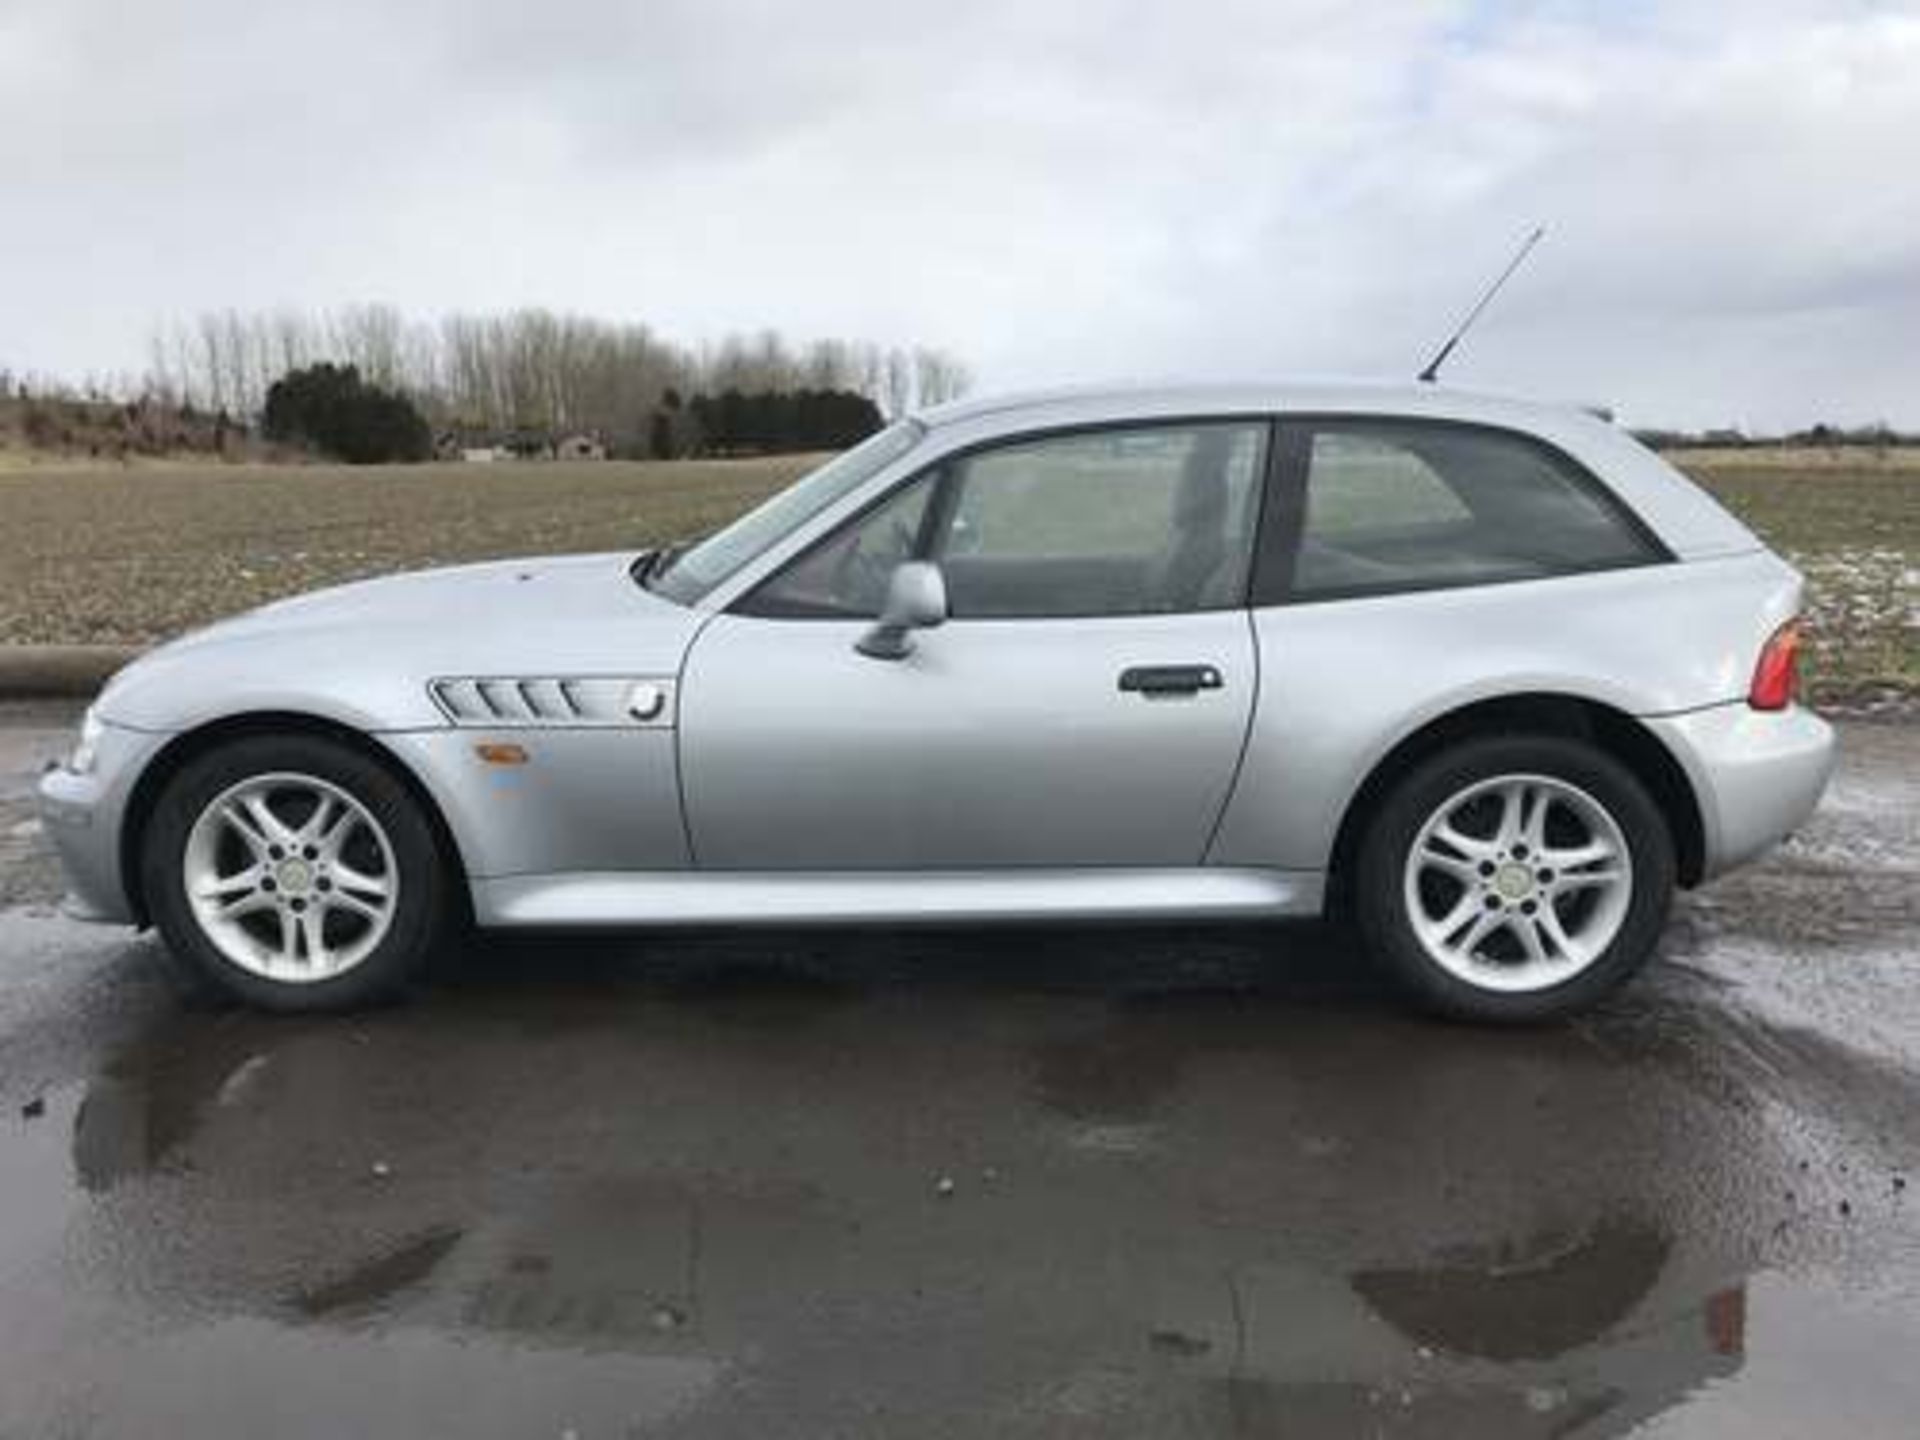 BMW Z3 COUPE- 2865cc - Image 6 of 32